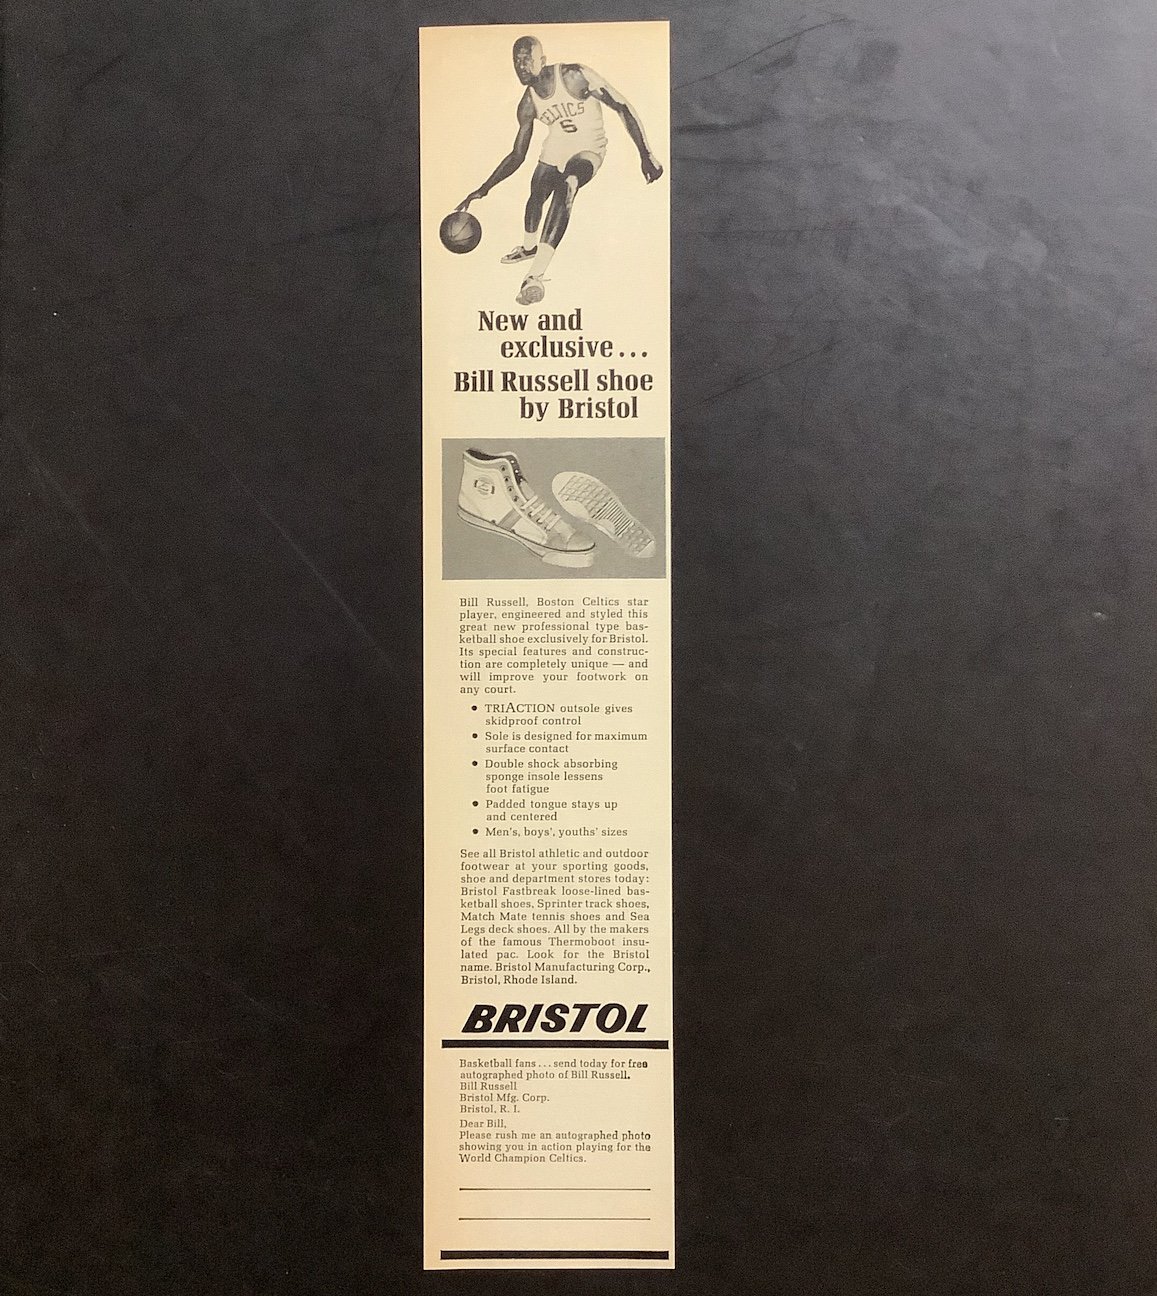 The photo with the autograph matches the photo from this advertisement that included an offer for a free photo and signature from Celtics legend Bill Russell.